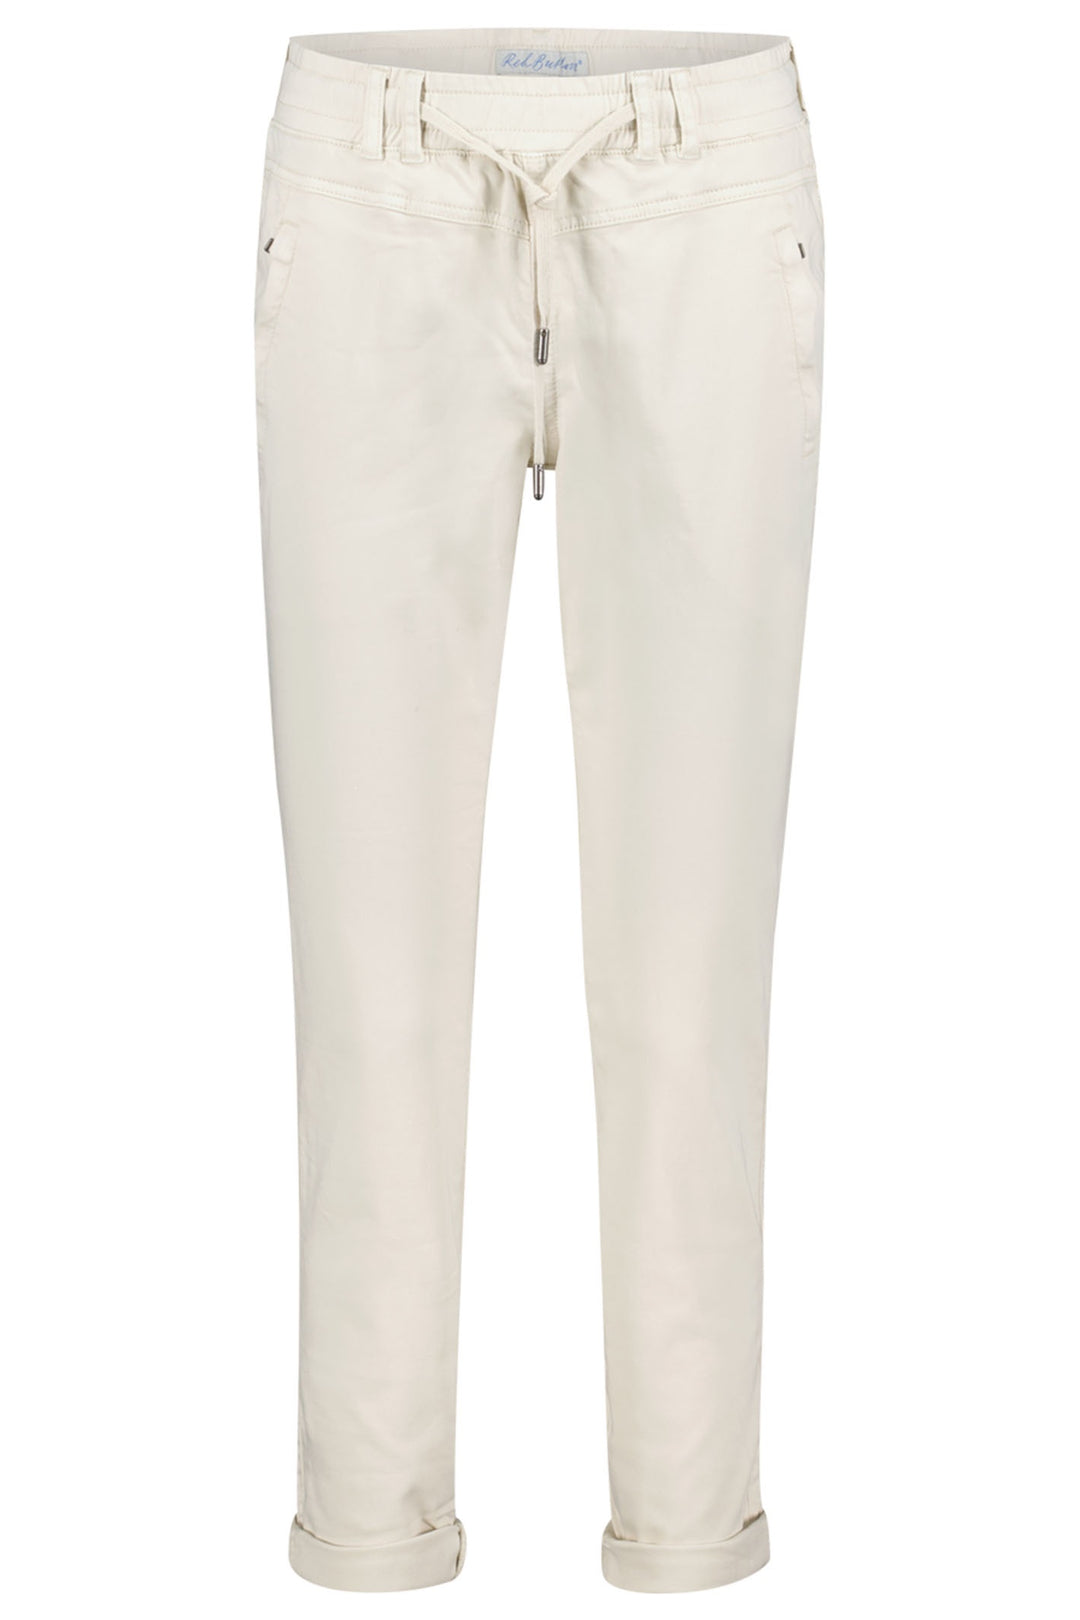 Red Button SRB4154 Tessy Pearl Beige Cropped Jogger Trousers - Dotique